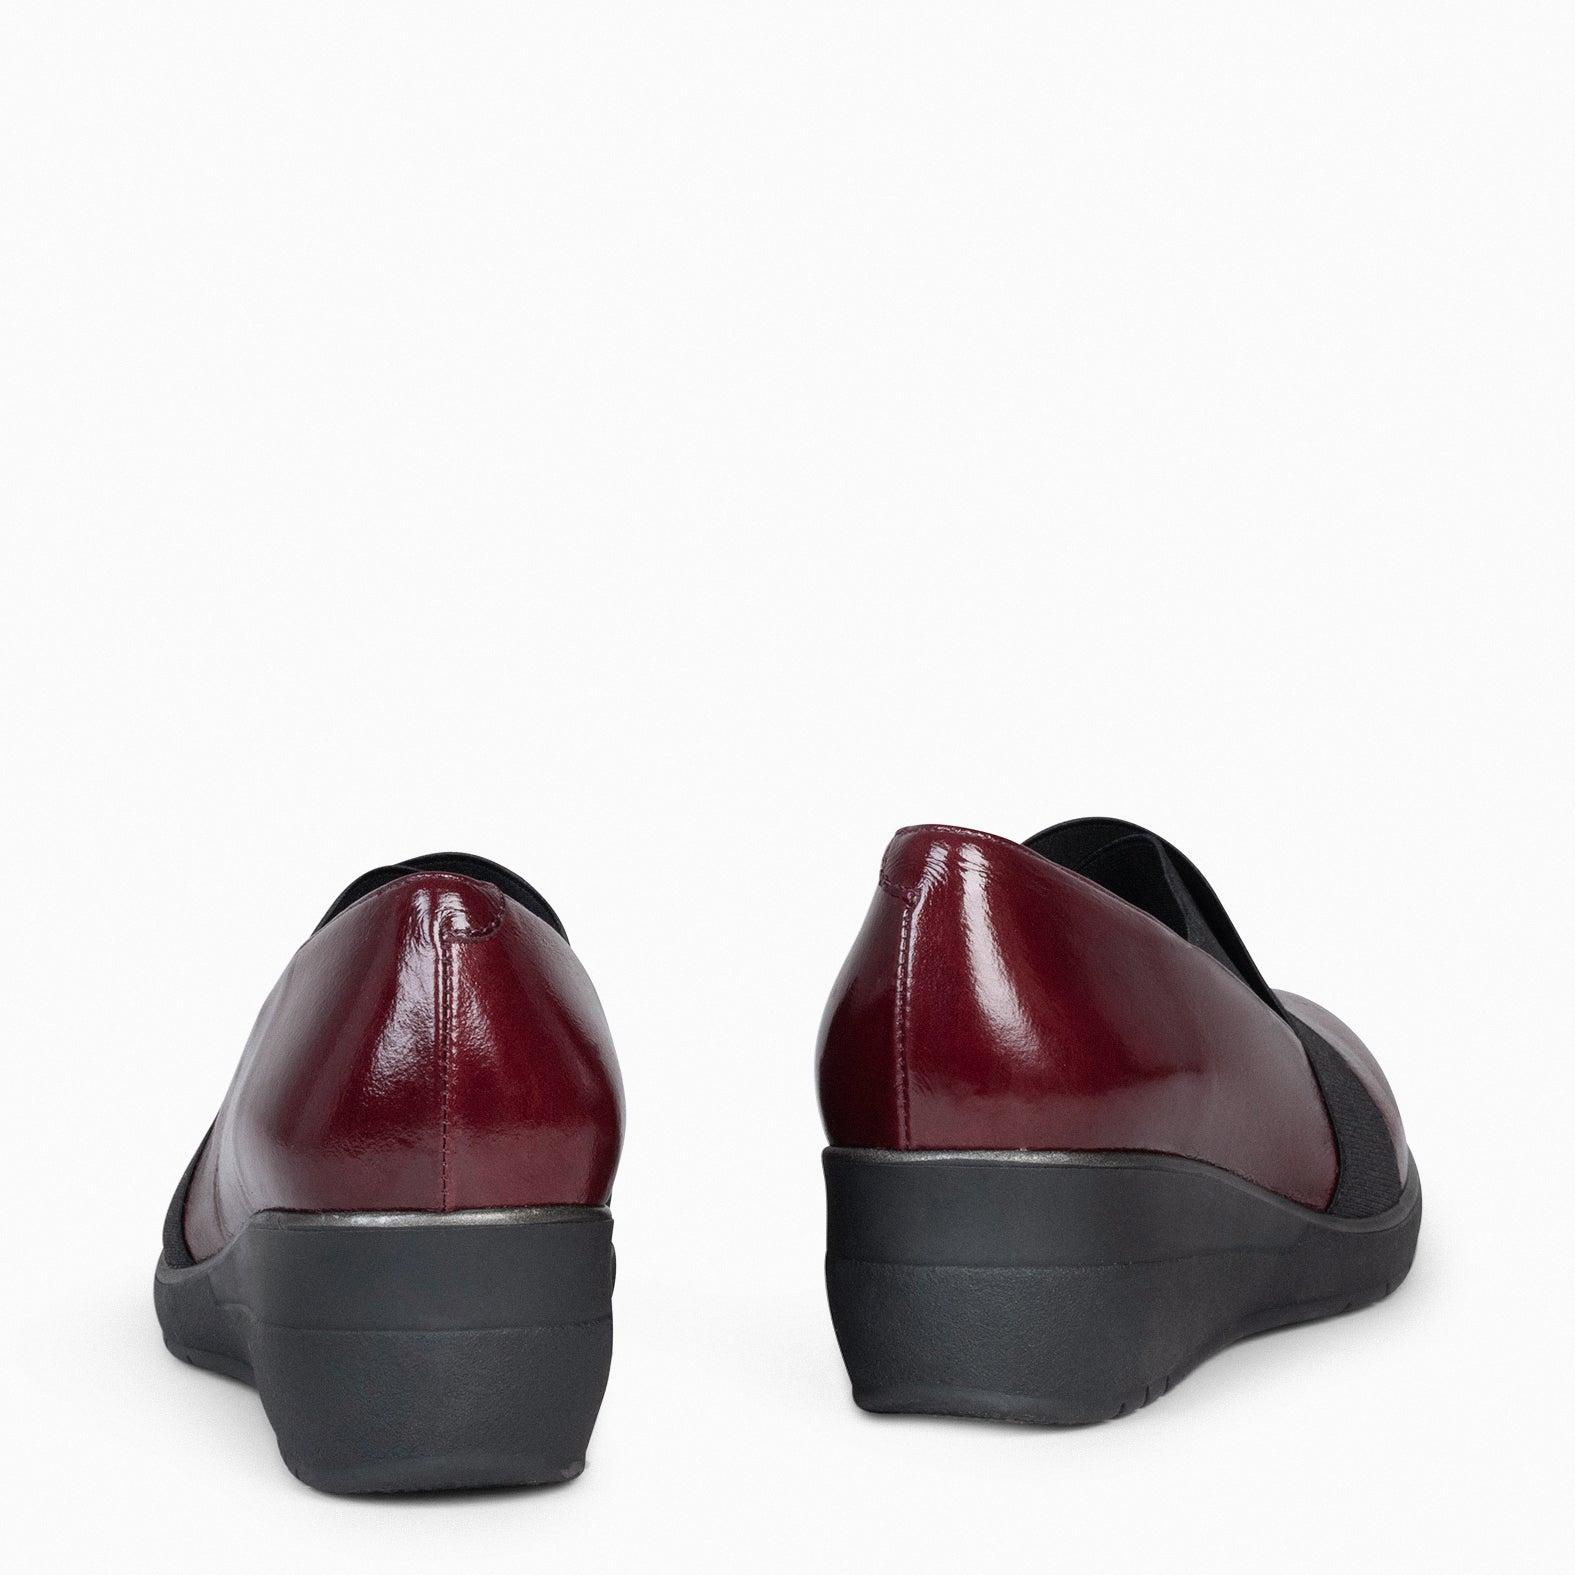 LIA - BURGUNDY Wedge shoes with elastic straps 